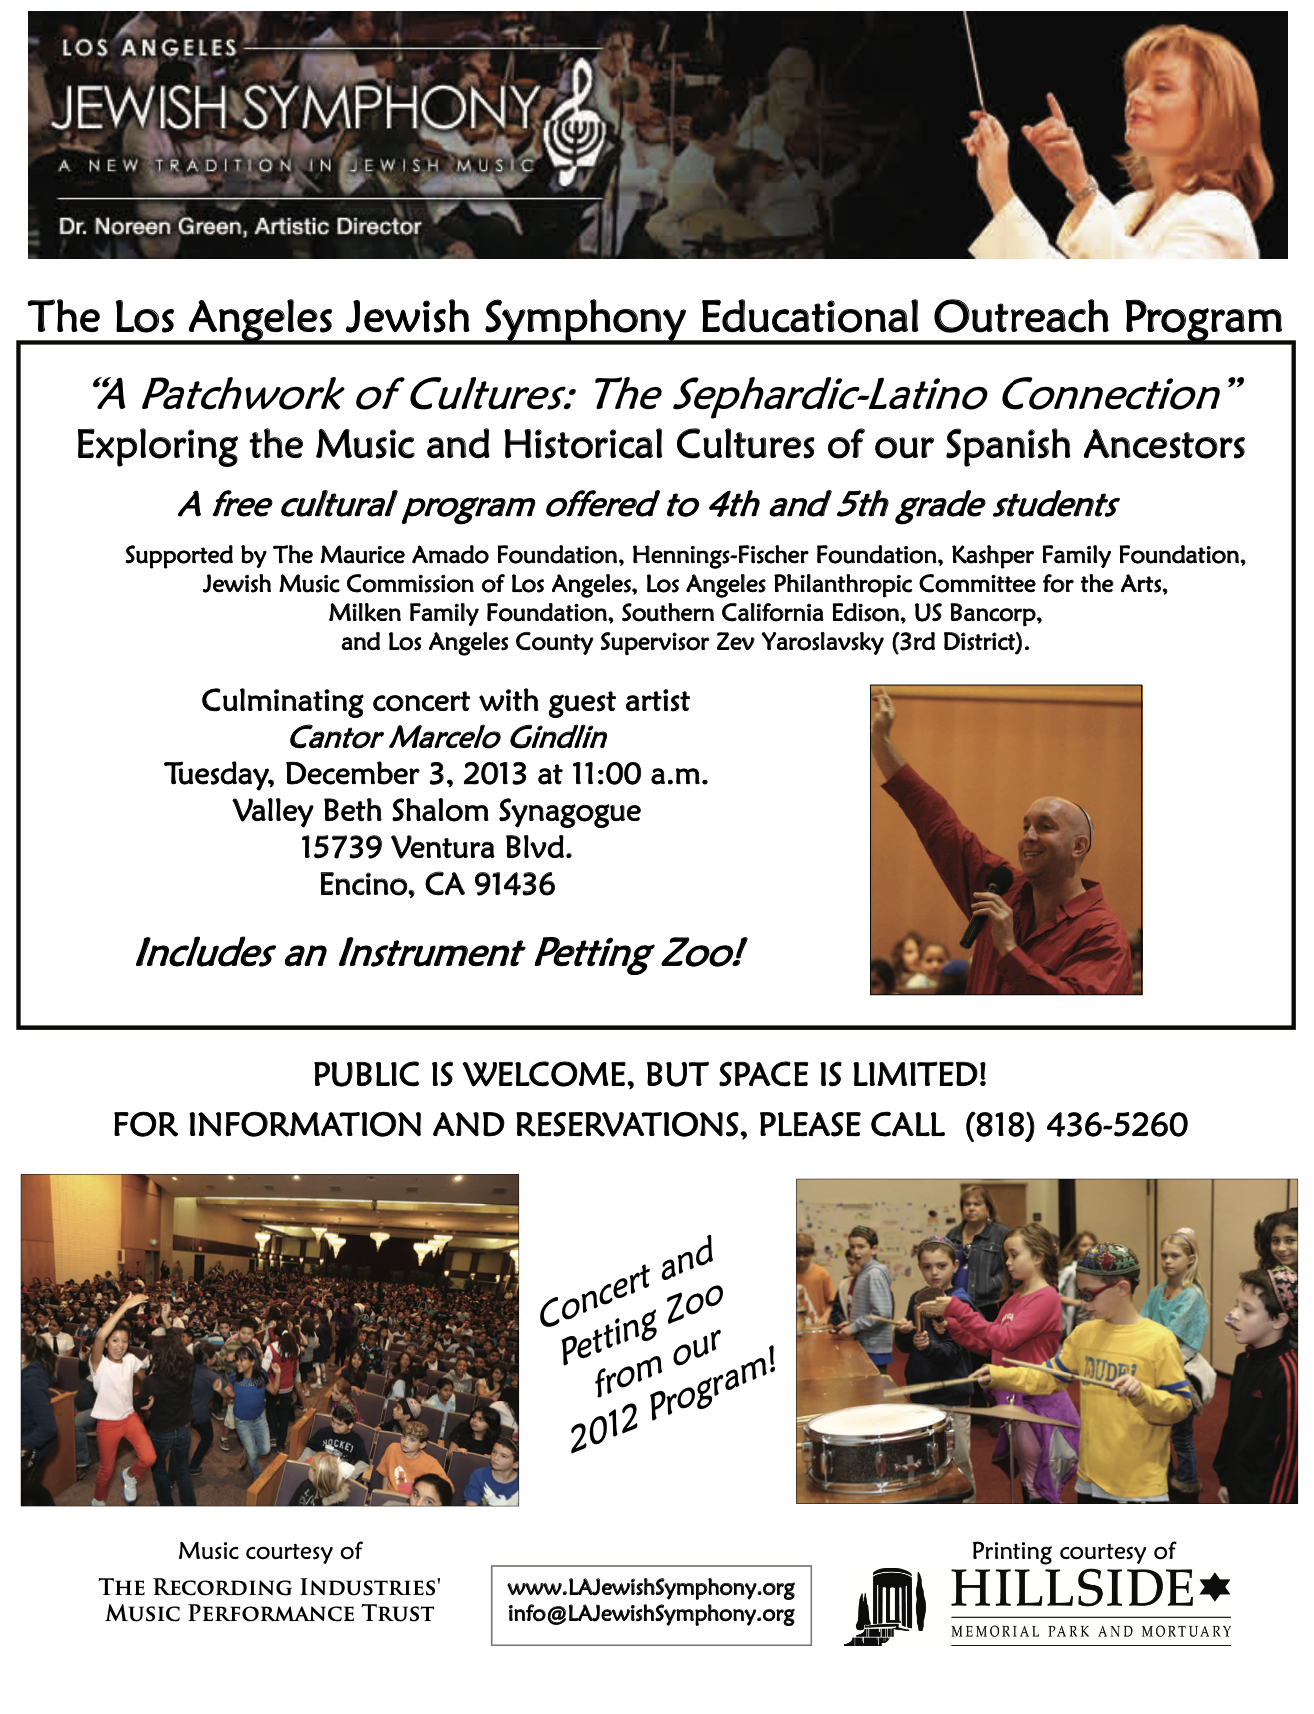 a flyer for the LAJS concert "A World of Jewish Music"